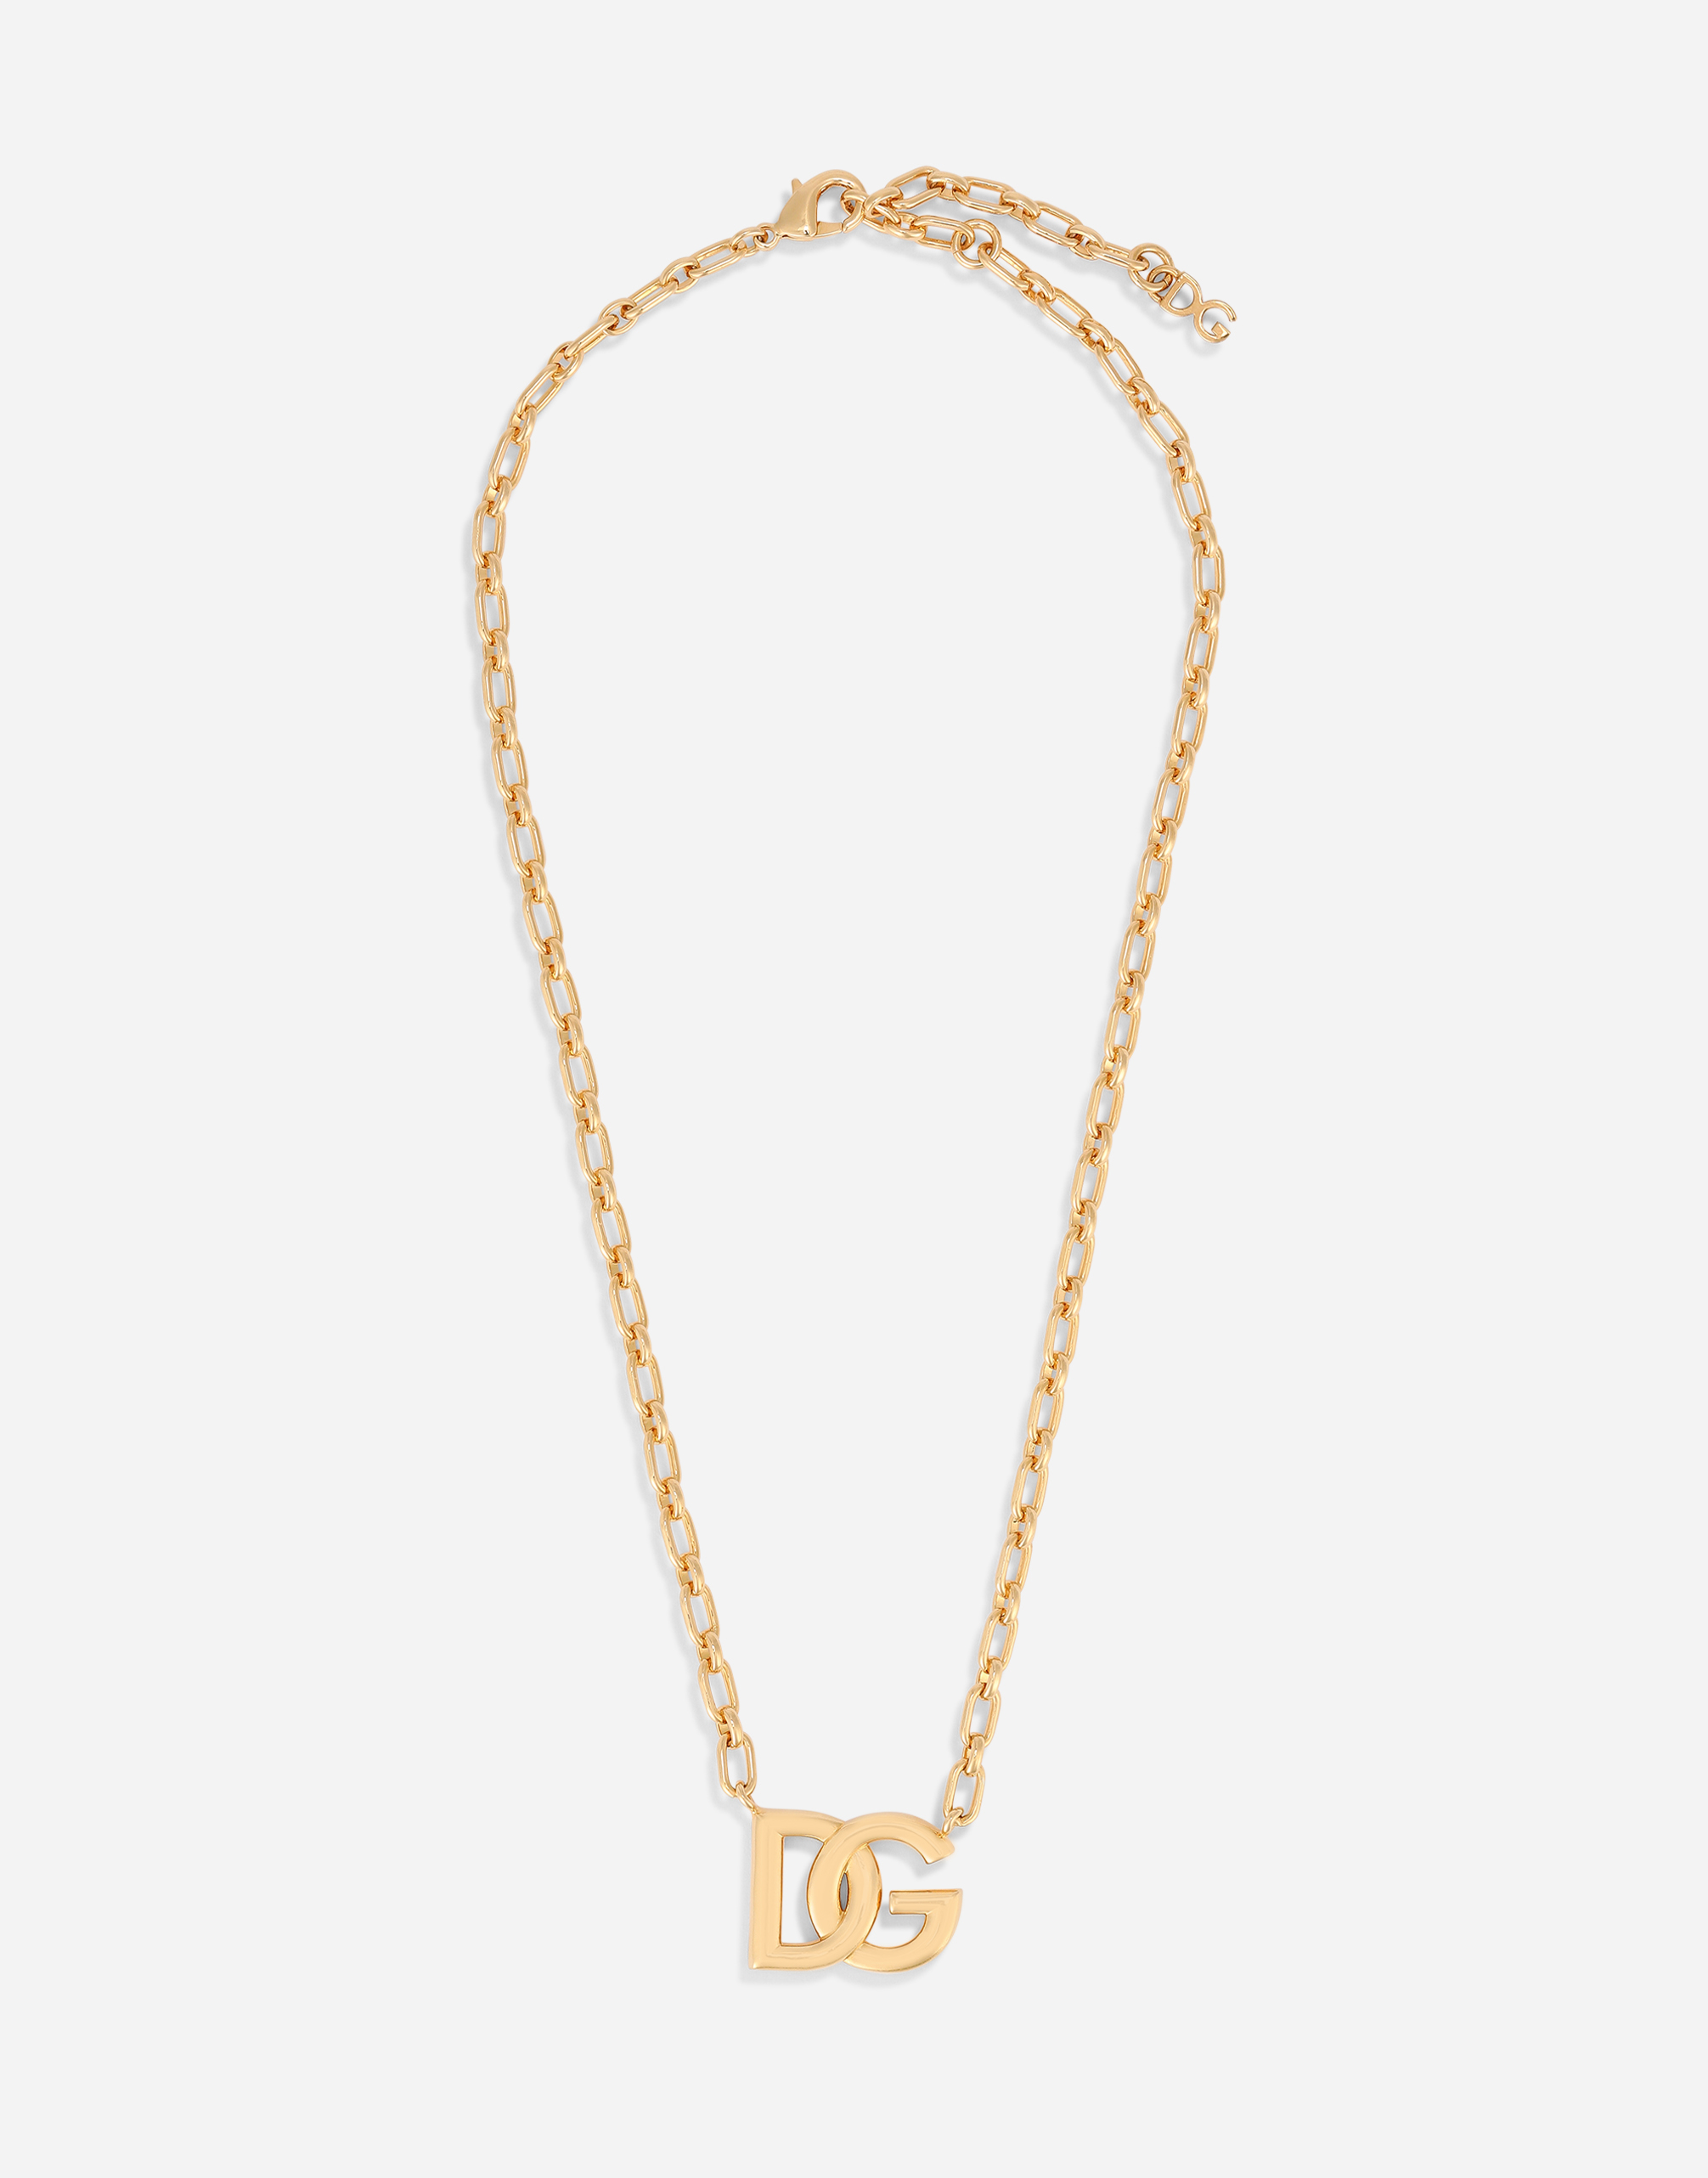 Chain necklace with DG logo